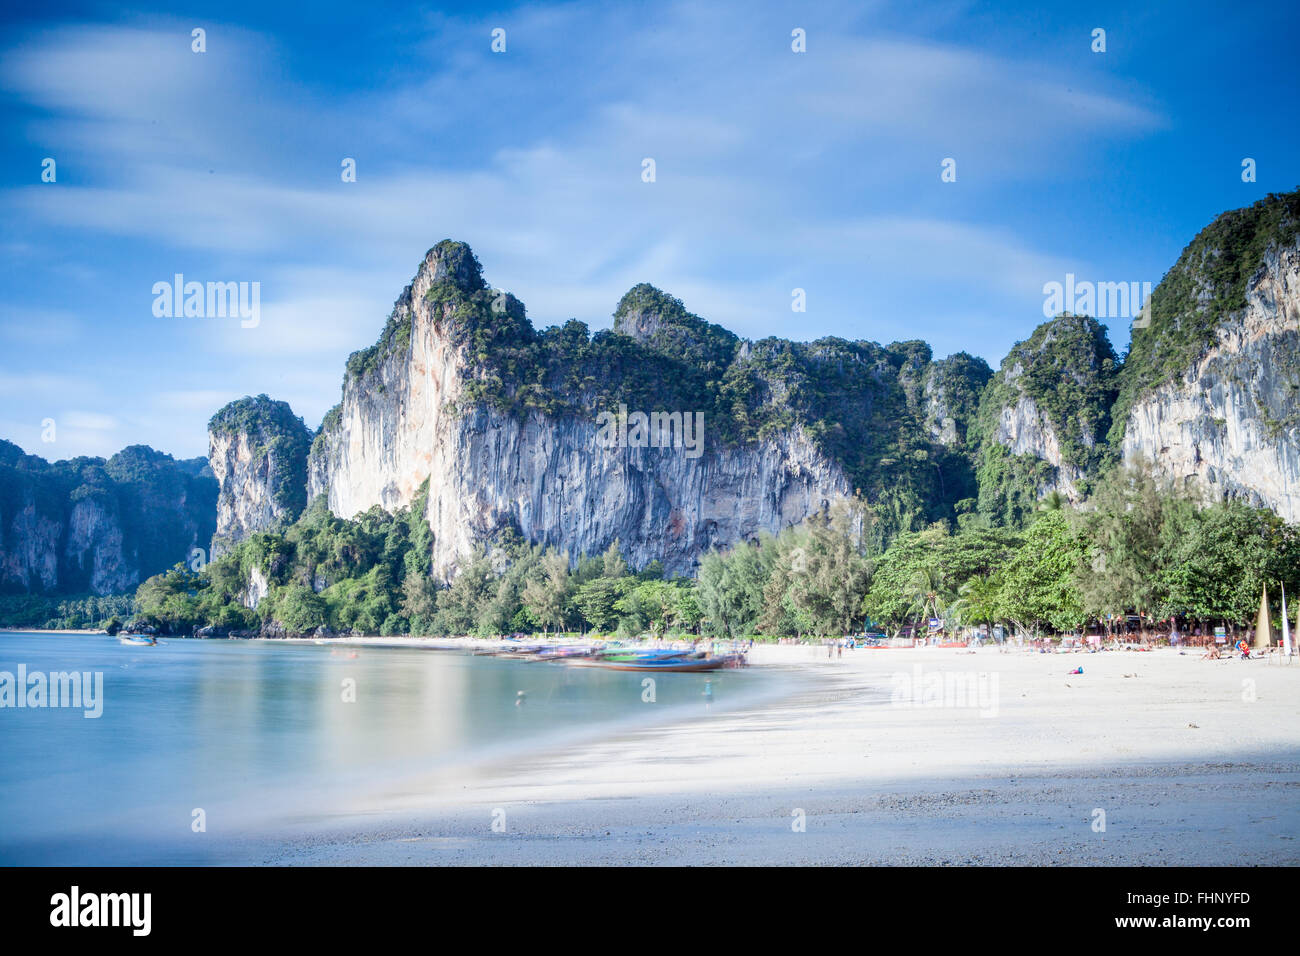 Long exposure image of Railay Beach with picturesque limestone cliffs in that line the white beach. Stock Photo